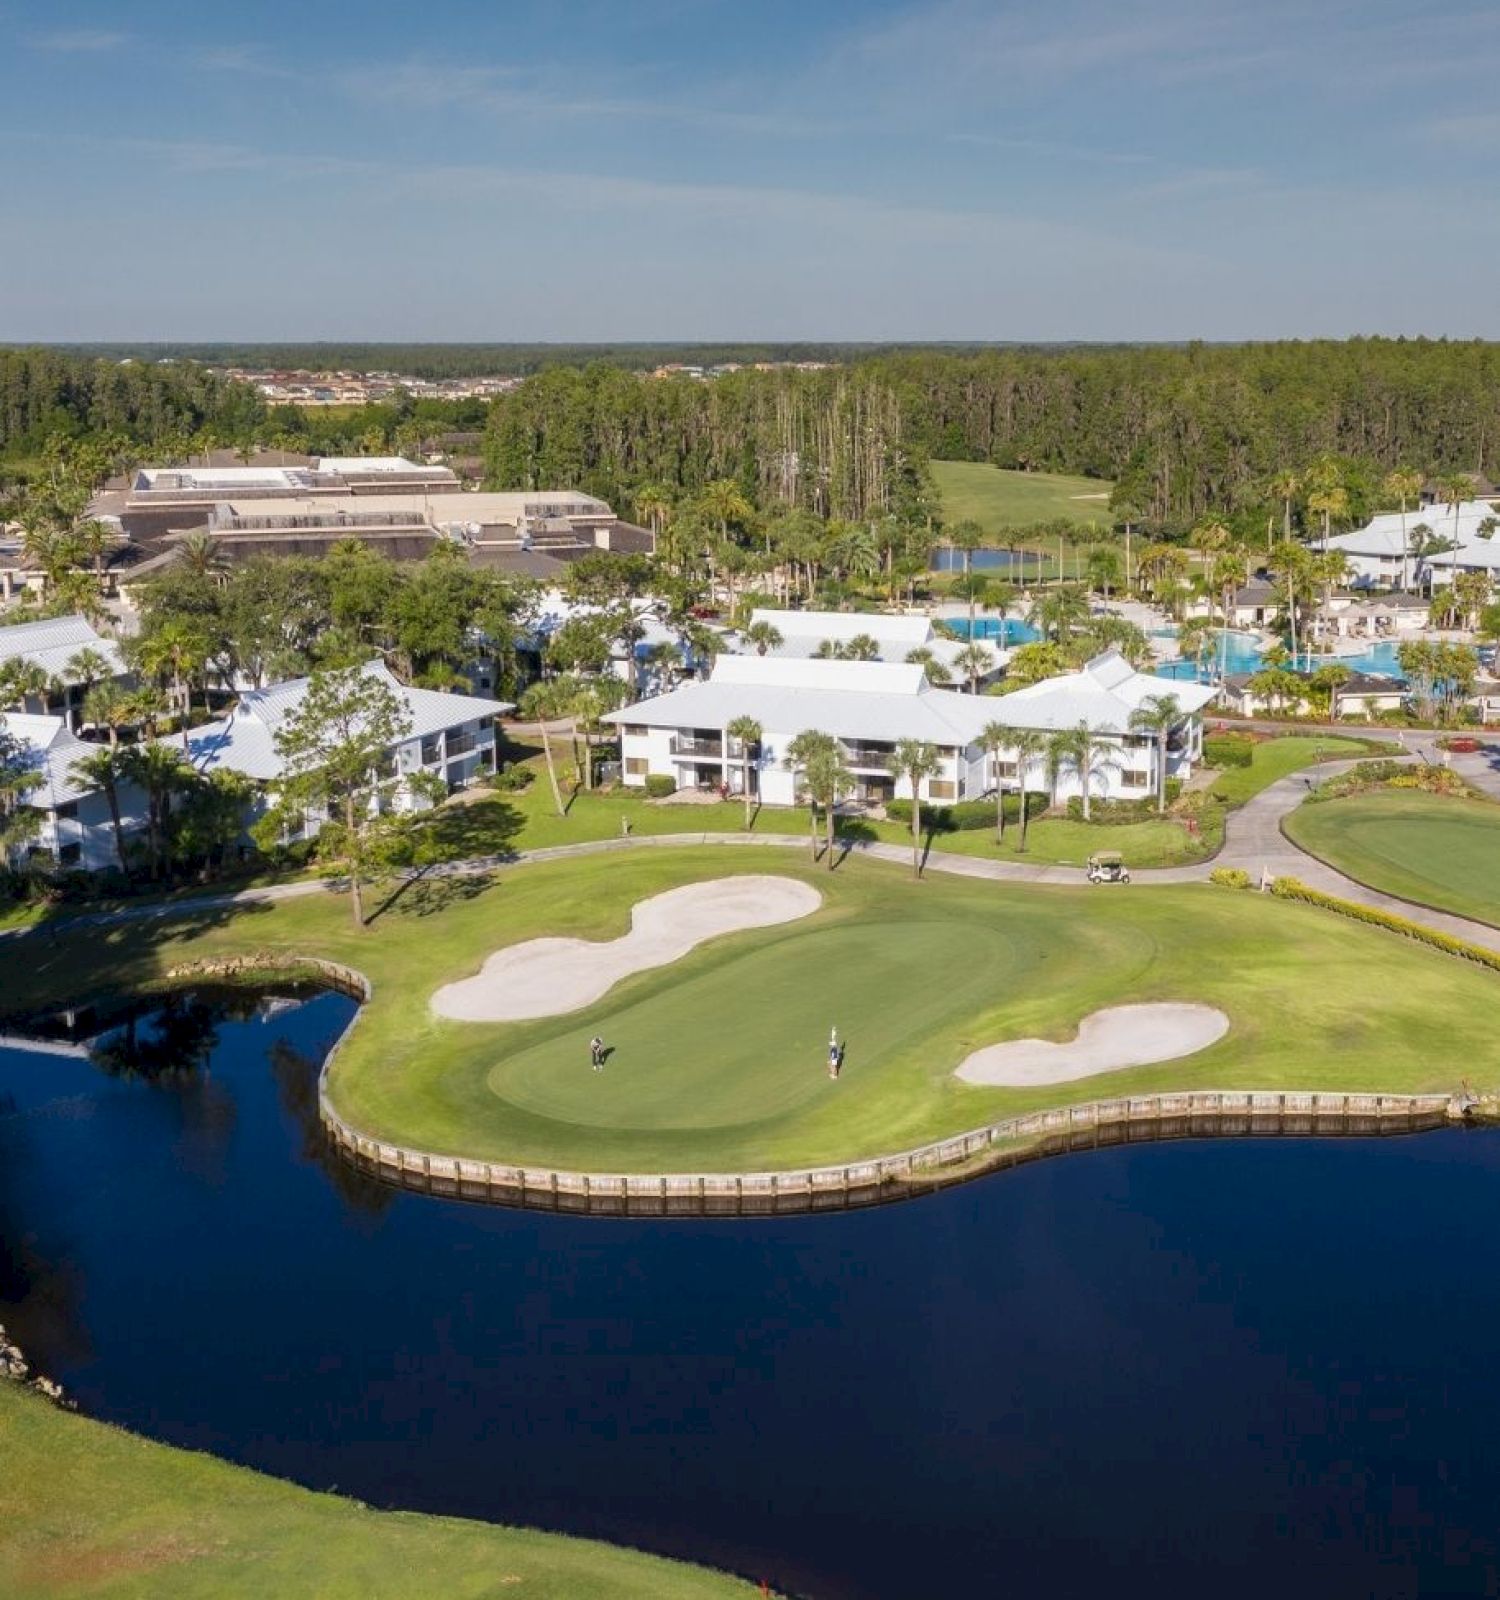 The image shows a scenic aerial view of a golf course with sand traps, a pond, and adjacent buildings surrounded by trees, under a clear sky.